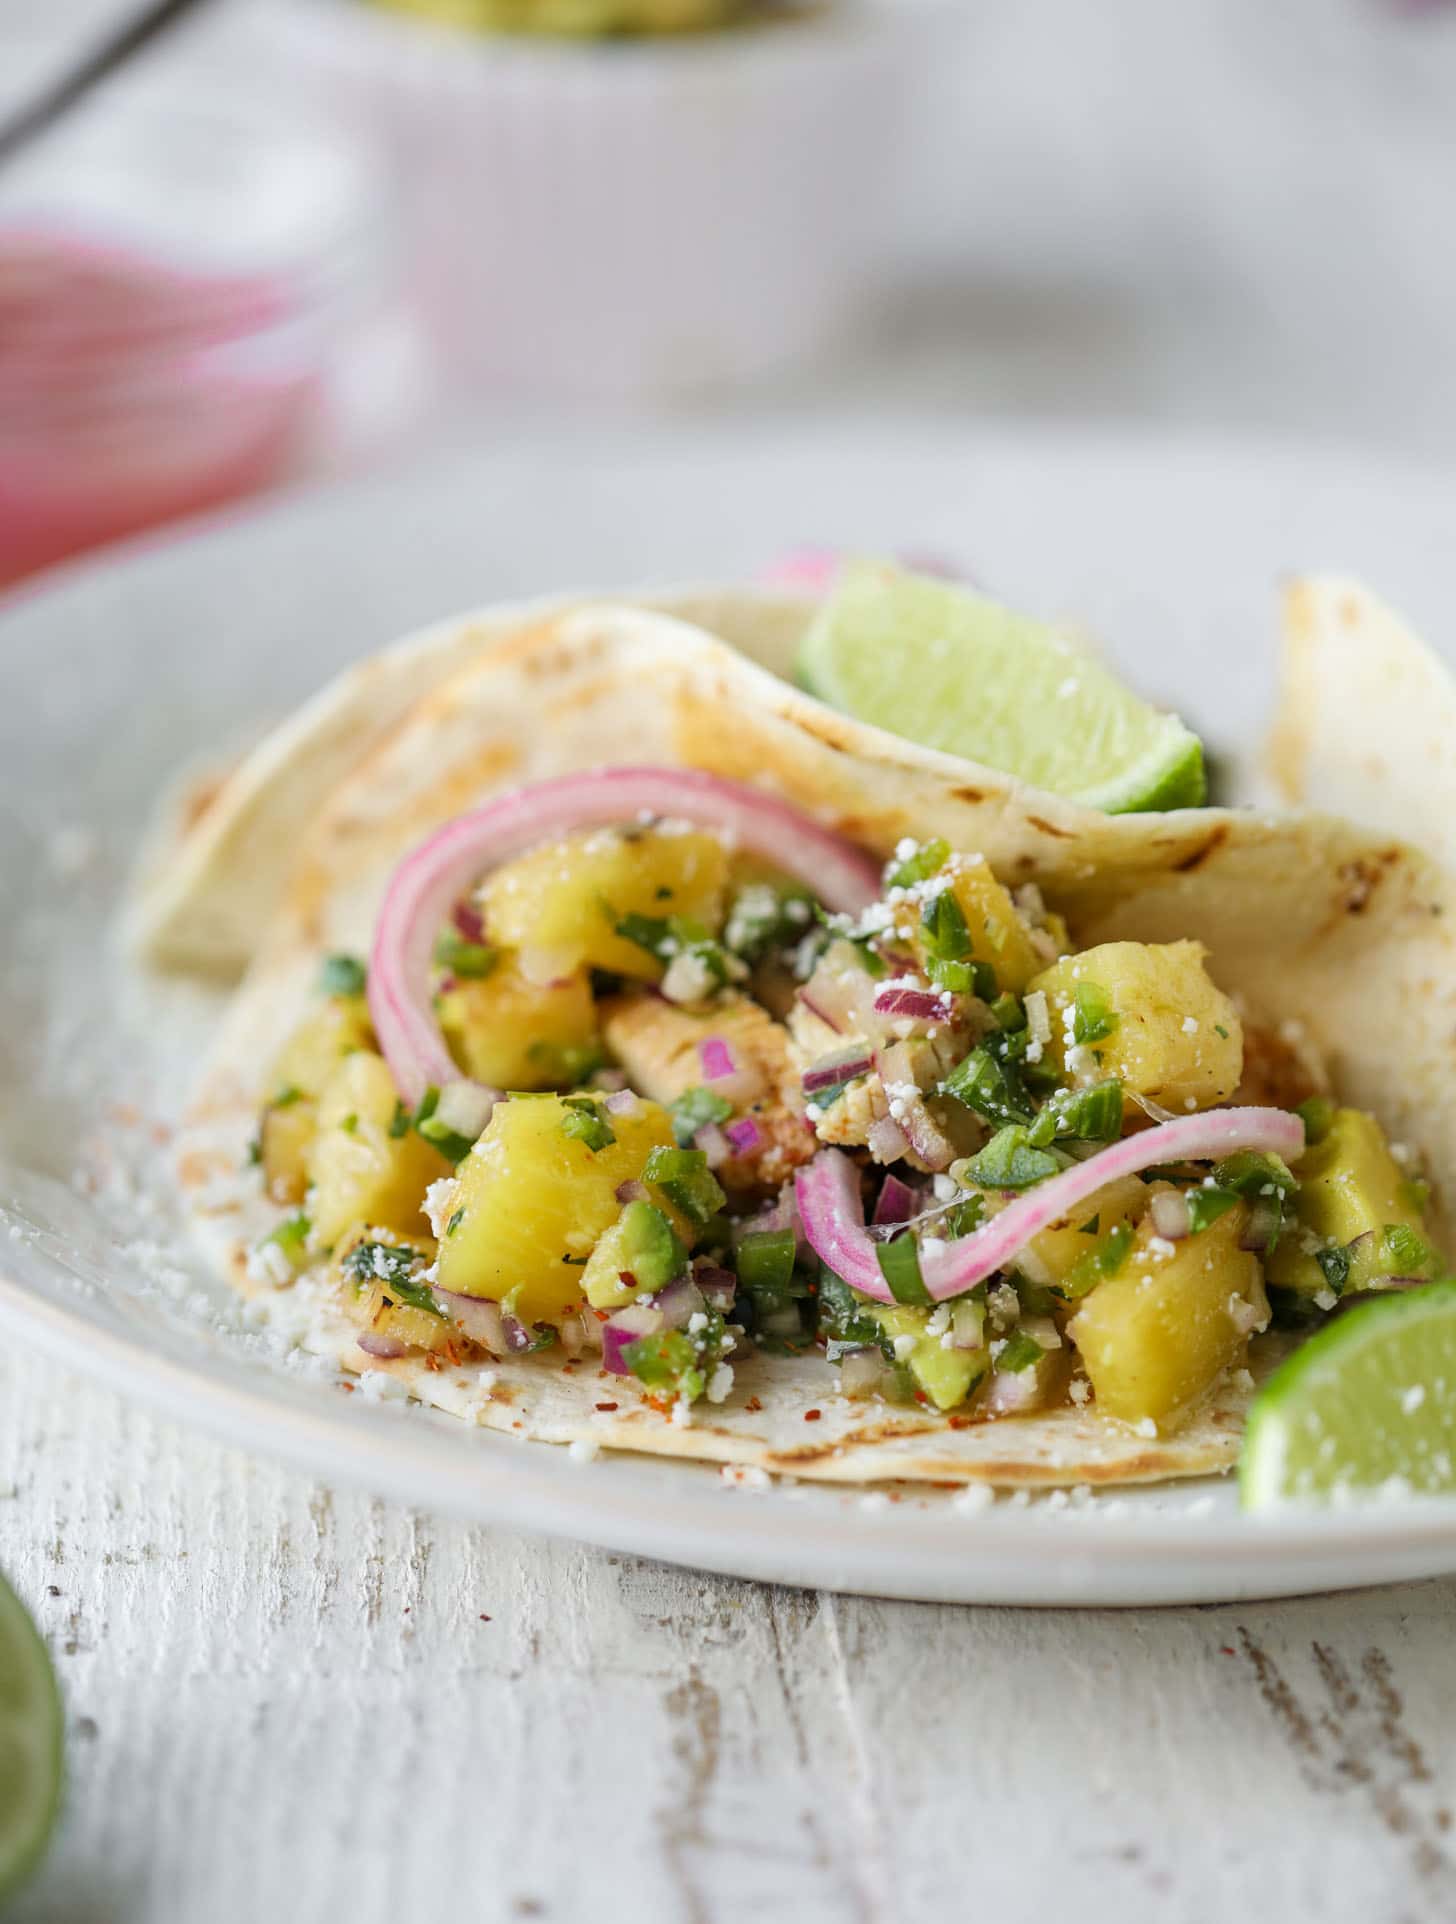 grilled chili lime chicken tacos with pineapple salsa and pickled onions